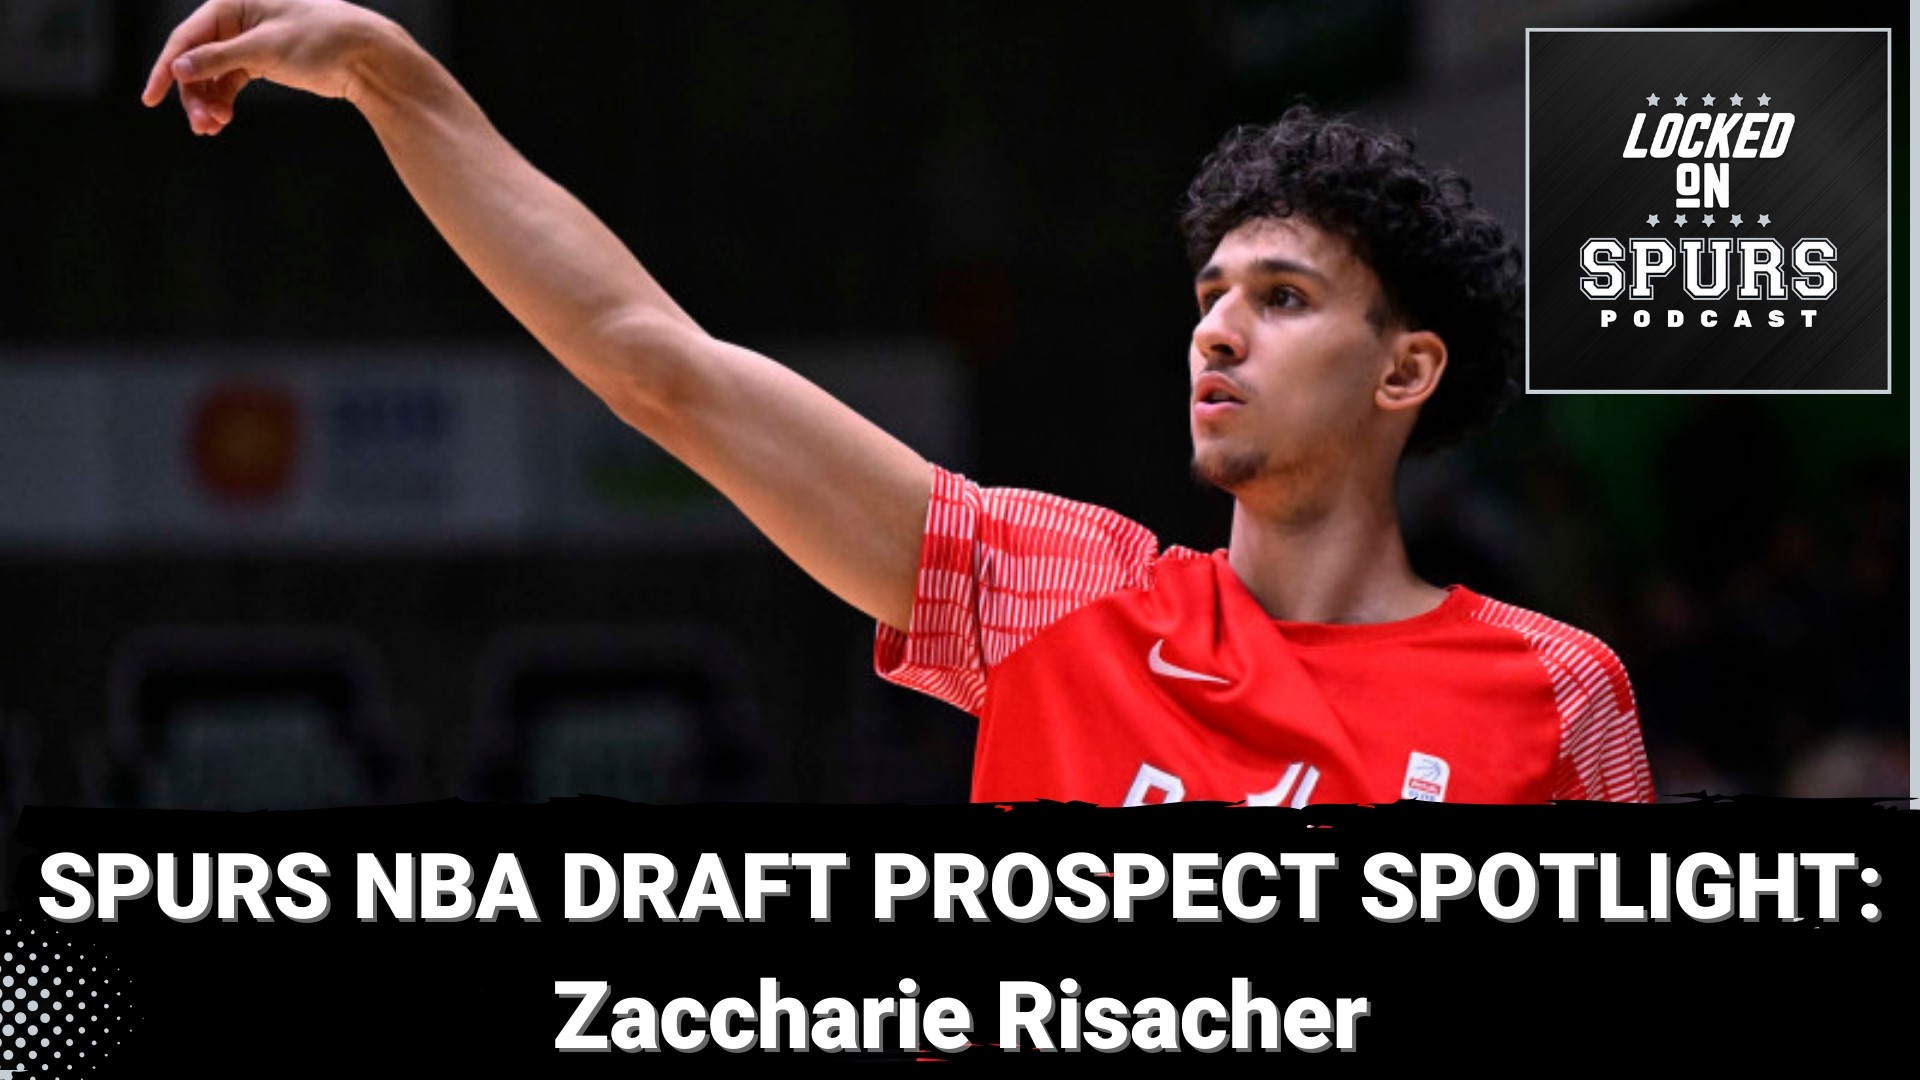 Should the Spurs consider selecting Risacher with their first-round pick?